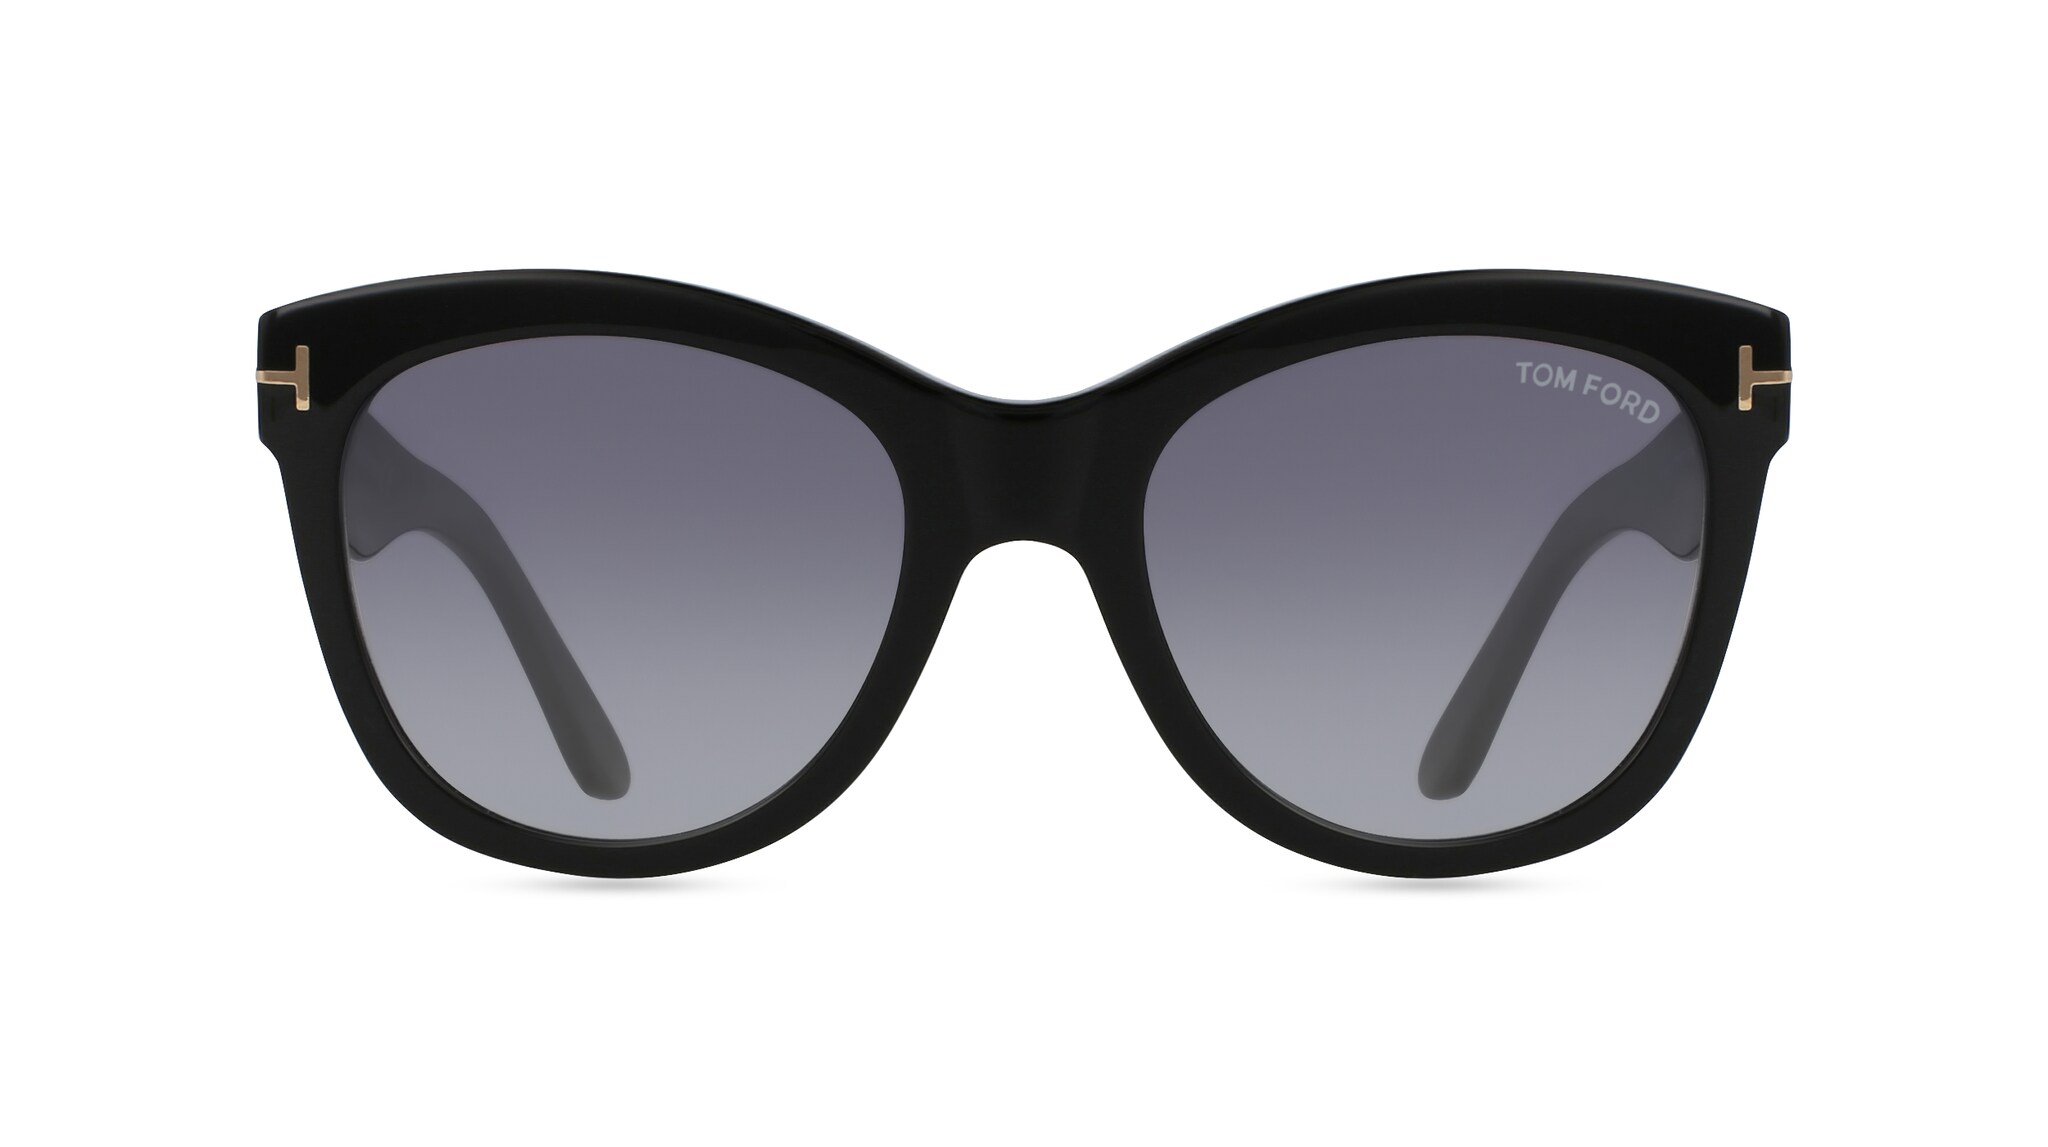 Tom Ford TF 0870 WALLACE